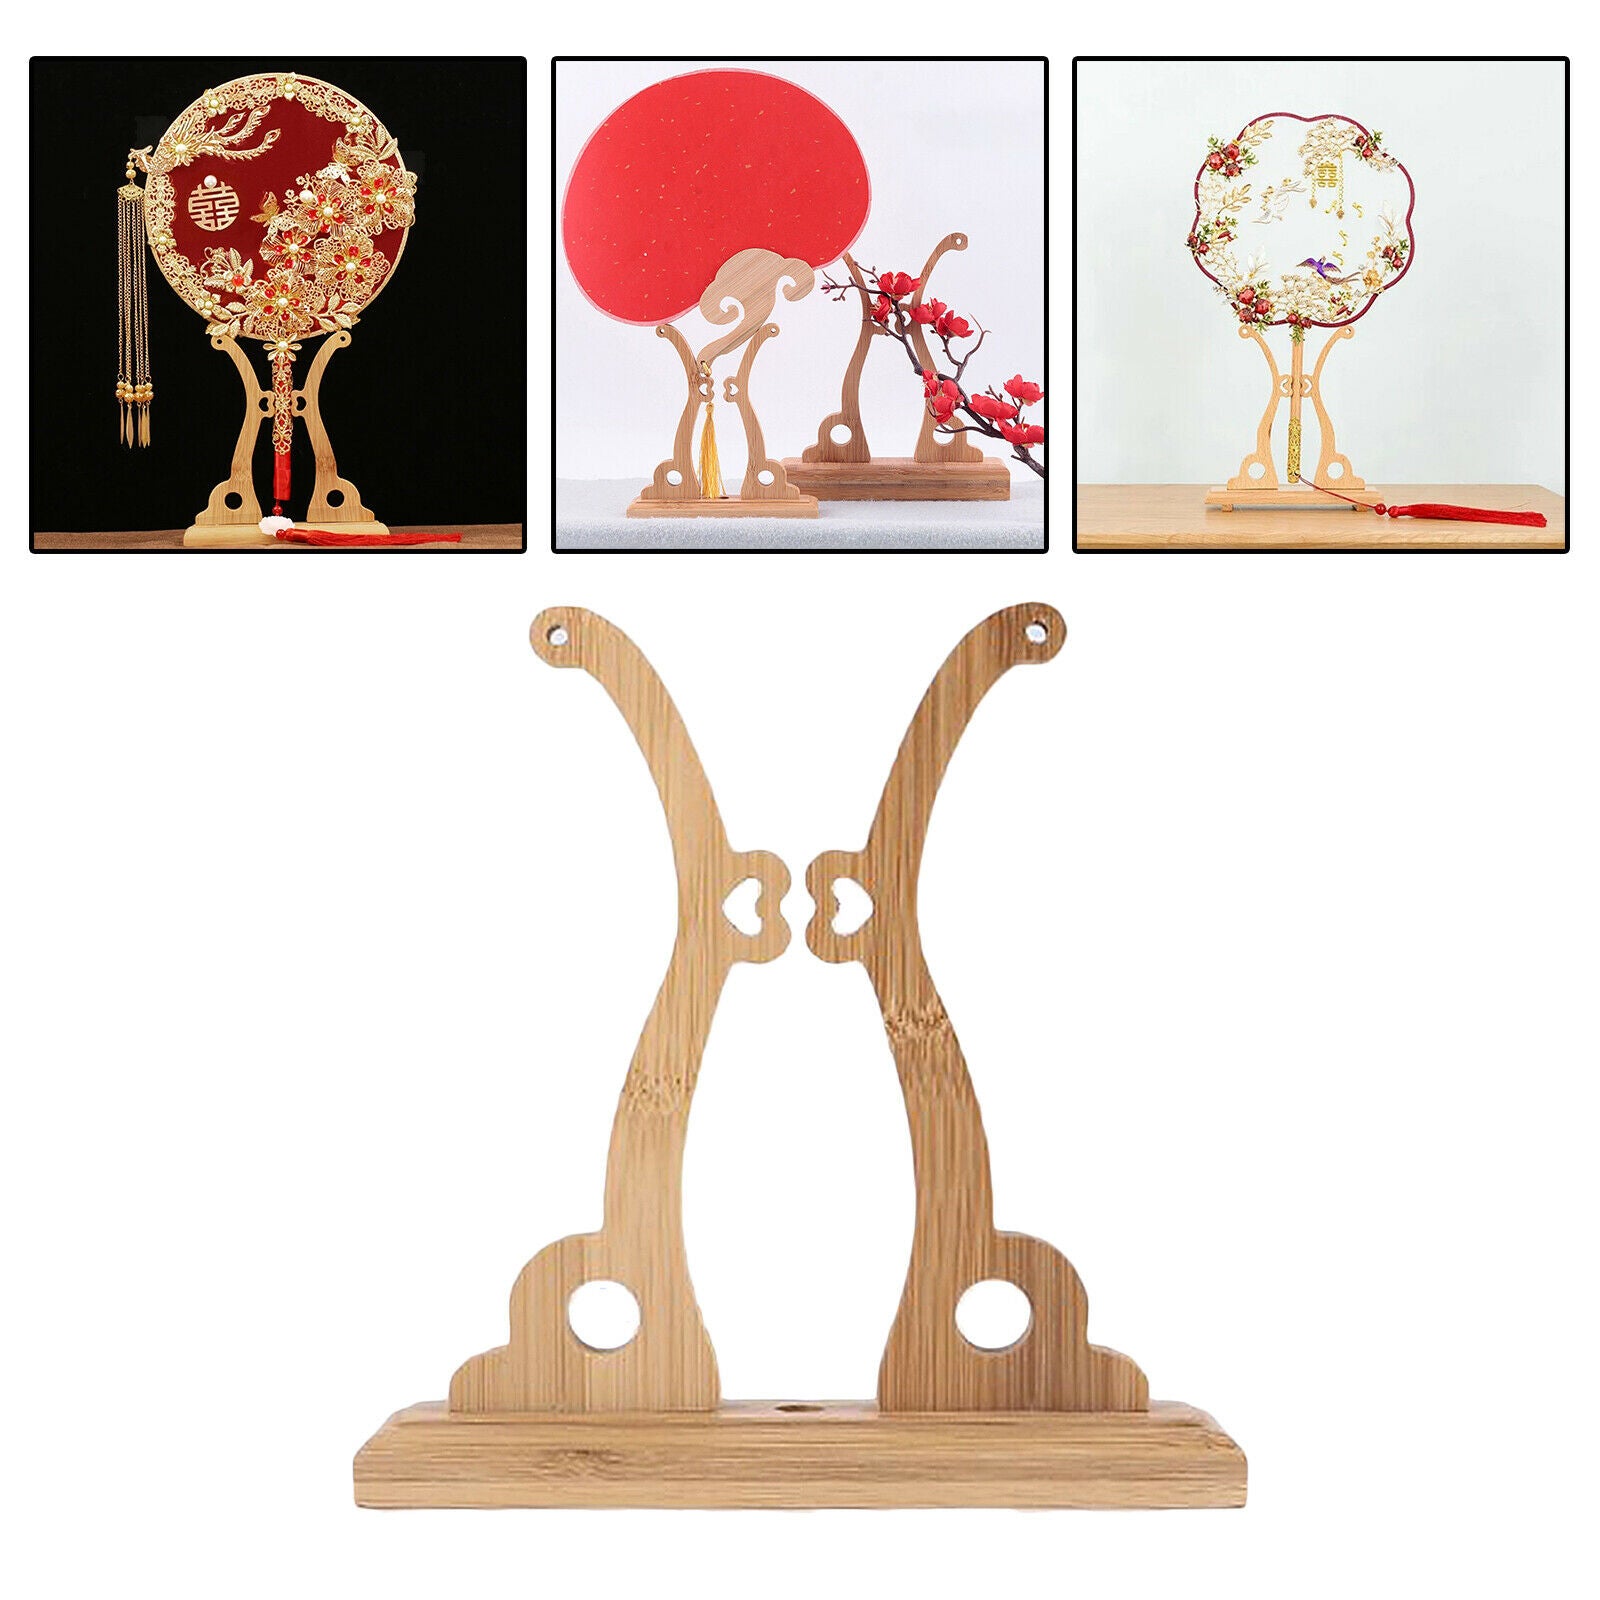 Bamboo Fans Bracket Holder Display Stand for Chinese Round Fan Home Decor